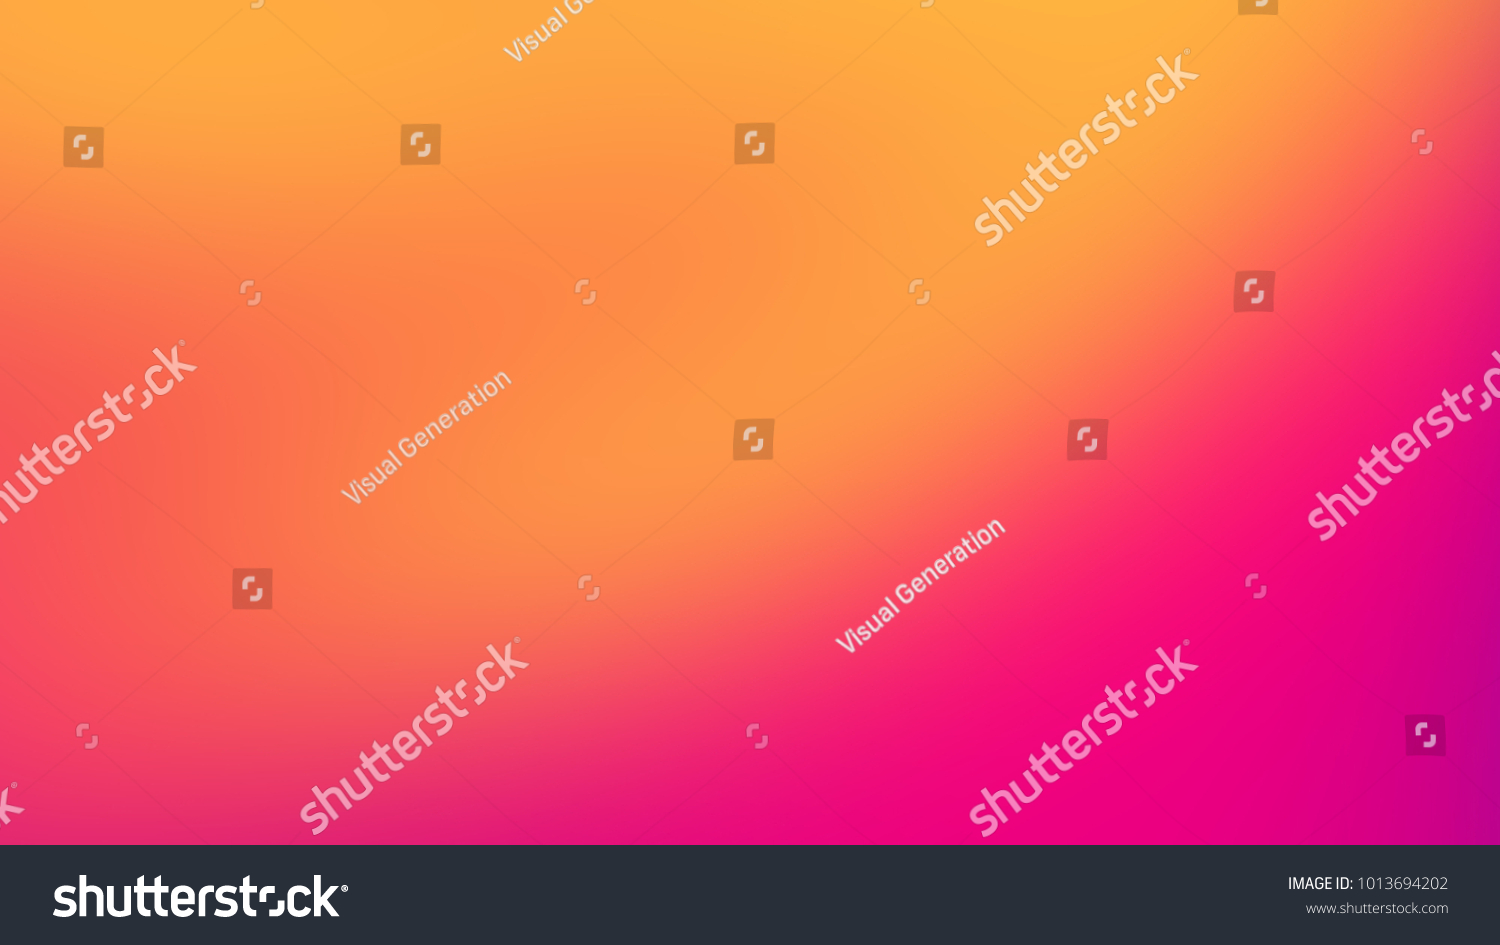 Sunny summer bright sweet multicolor blurred Background. Purple, ultraviolet, violet, red - fashion pop art gradient mesh. Trendy hipster out-of-focus effect. Horizontal Layout. #1013694202